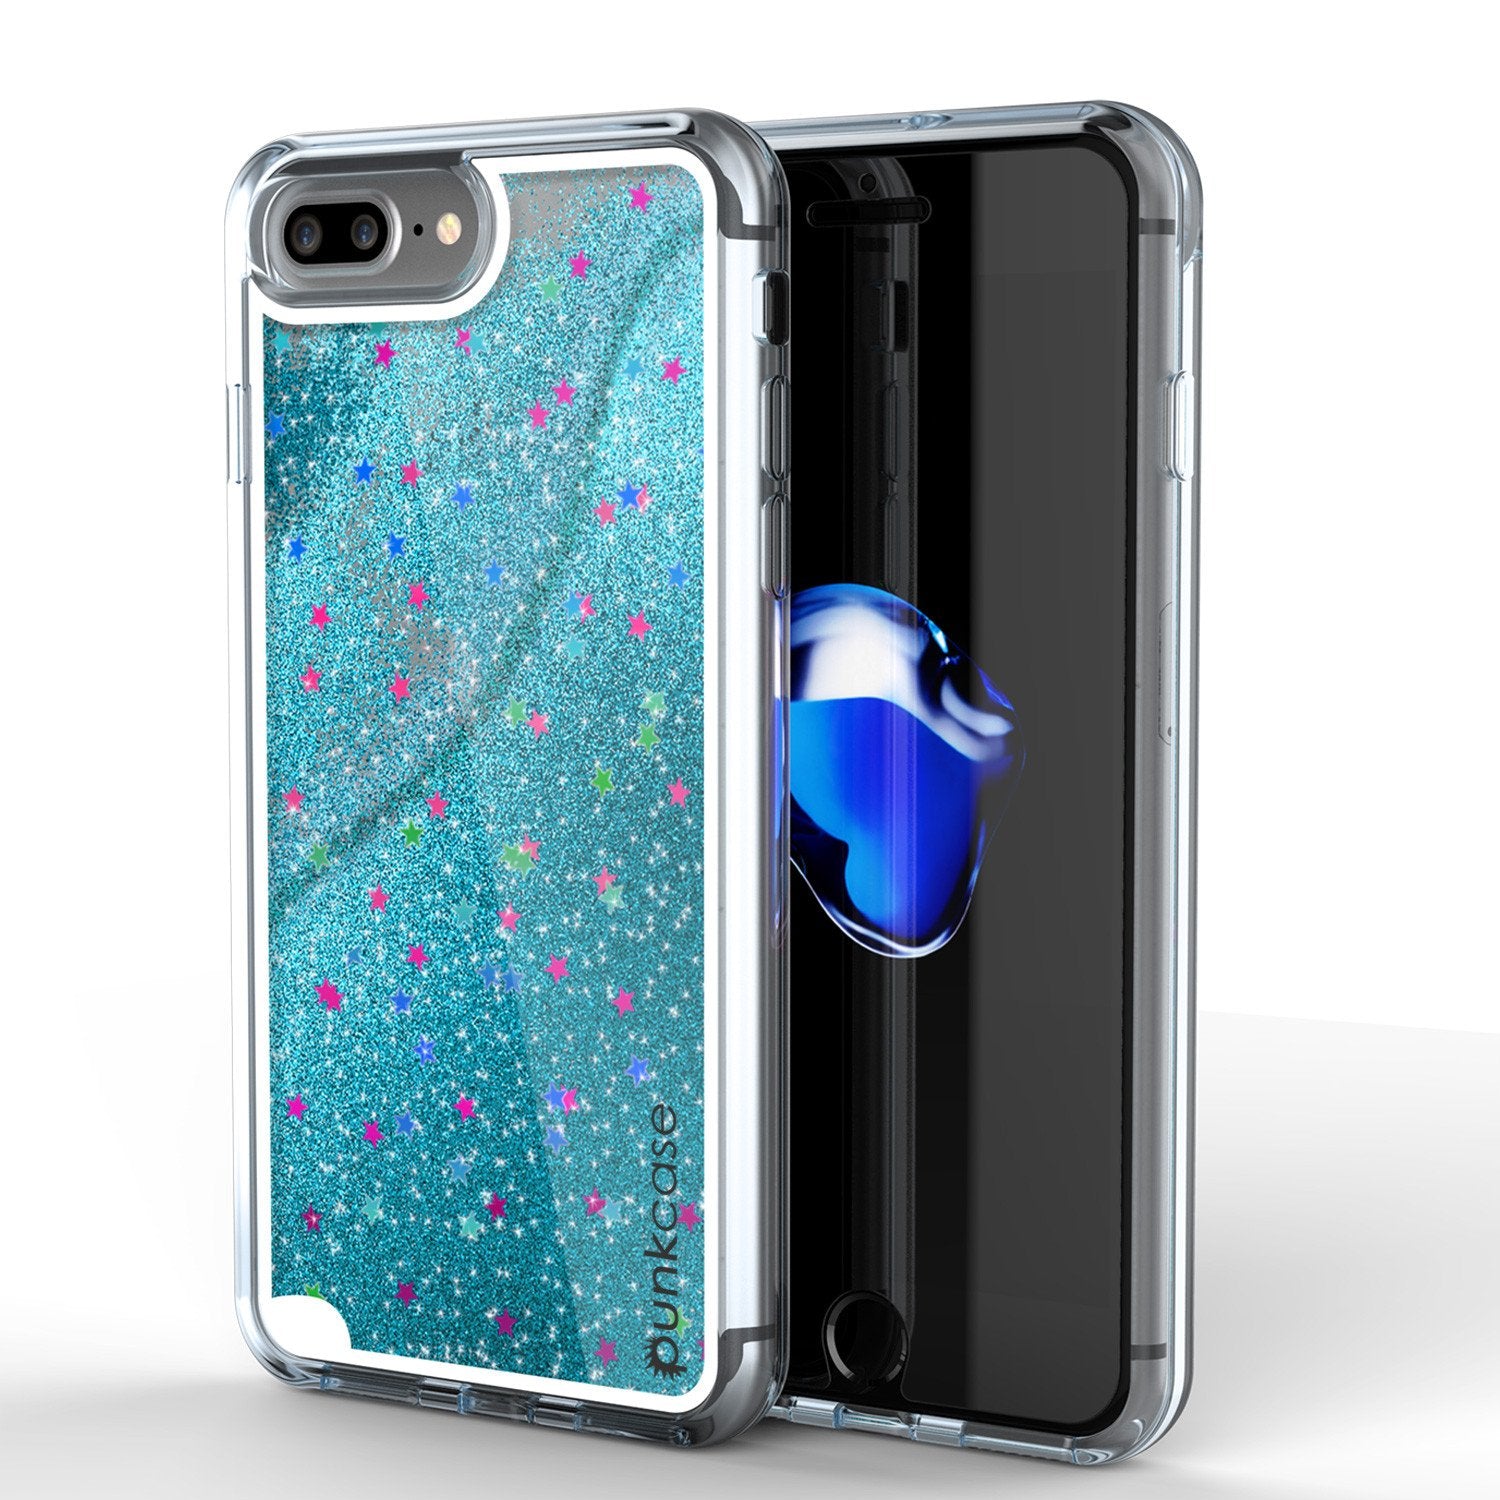 iPhone 7+Plus Case, PunkCase LIQUID Teal Series, Protective Dual Layer Floating Glitter Cover